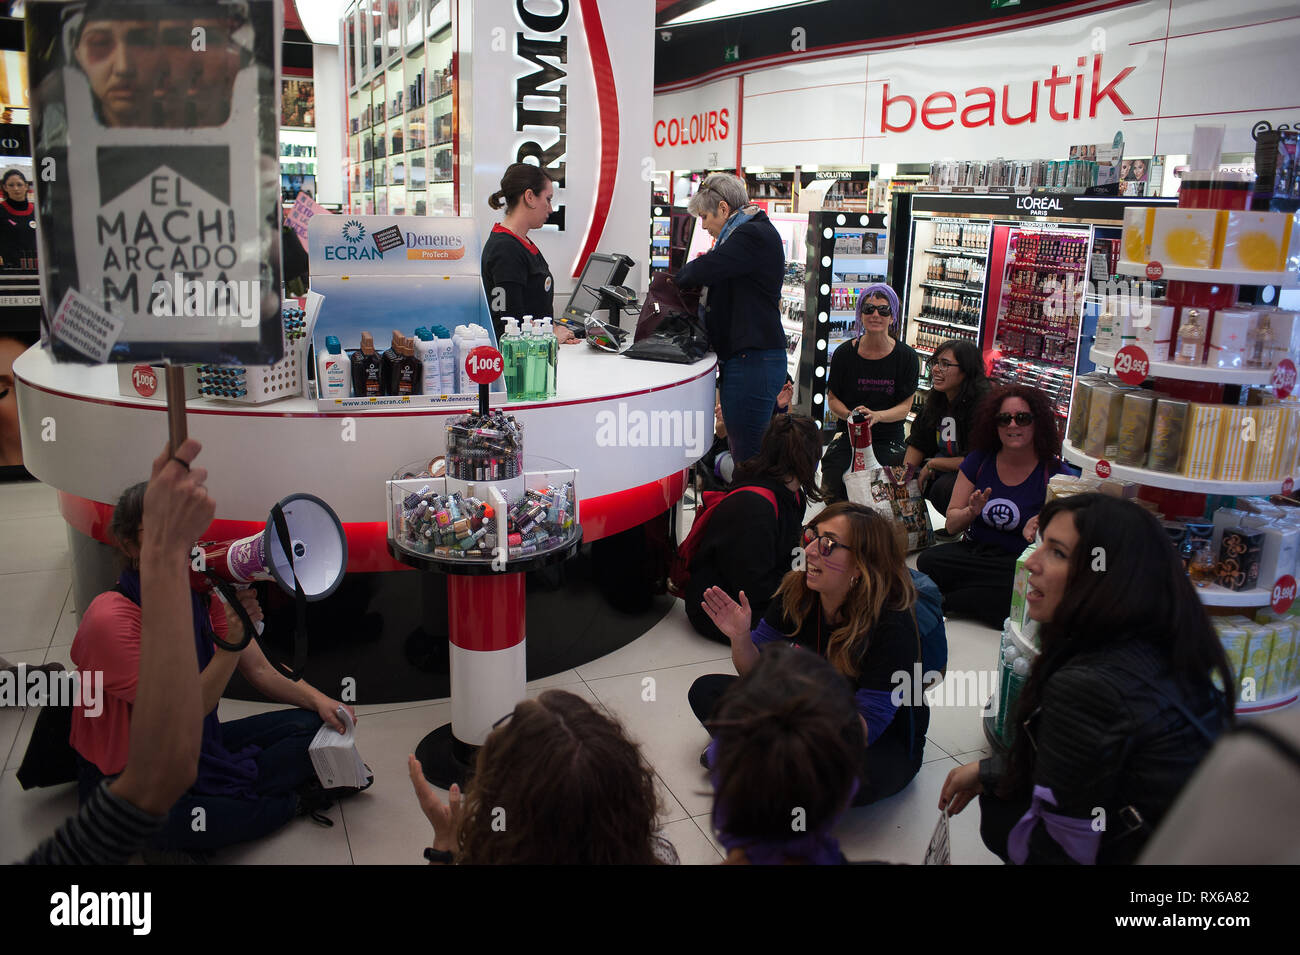 Malaga, MALAGA, Spain. 8th Mar, 2019. A group of picketers women are seen seated inside primor shop as they take part during the 24-hours General Women's Strike.A 24-hour General Women's Strike. Every 08 march coinciding with the International Women's Day, thousands of women and organizations around the world take the streets to protest against women violence and to demand for gender equality between men and women. Credit: Jesus Merida/SOPA Images/ZUMA Wire/Alamy Live News Stock Photo